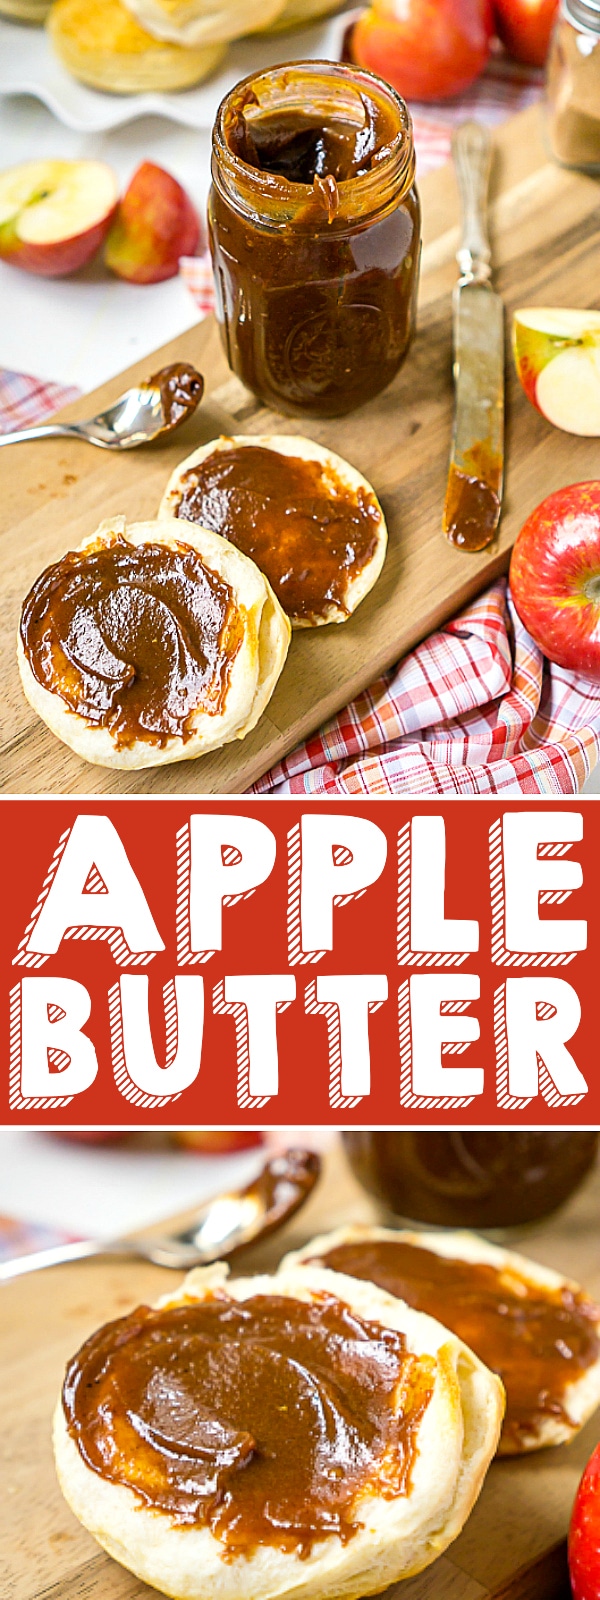 Homemade Recipe for Apple Butter in Slow Cooker - Flavorful, spice, and incredibly rich! Inspired by the Cracker Barrel Apple Butter Recipe, this slow cooker apple butter recipe is easy to toss together and easily the best apple butter you've ever tasted! | The Love Nerds #applerecipe #slowcookerapplebutter #crockpotapplebutter